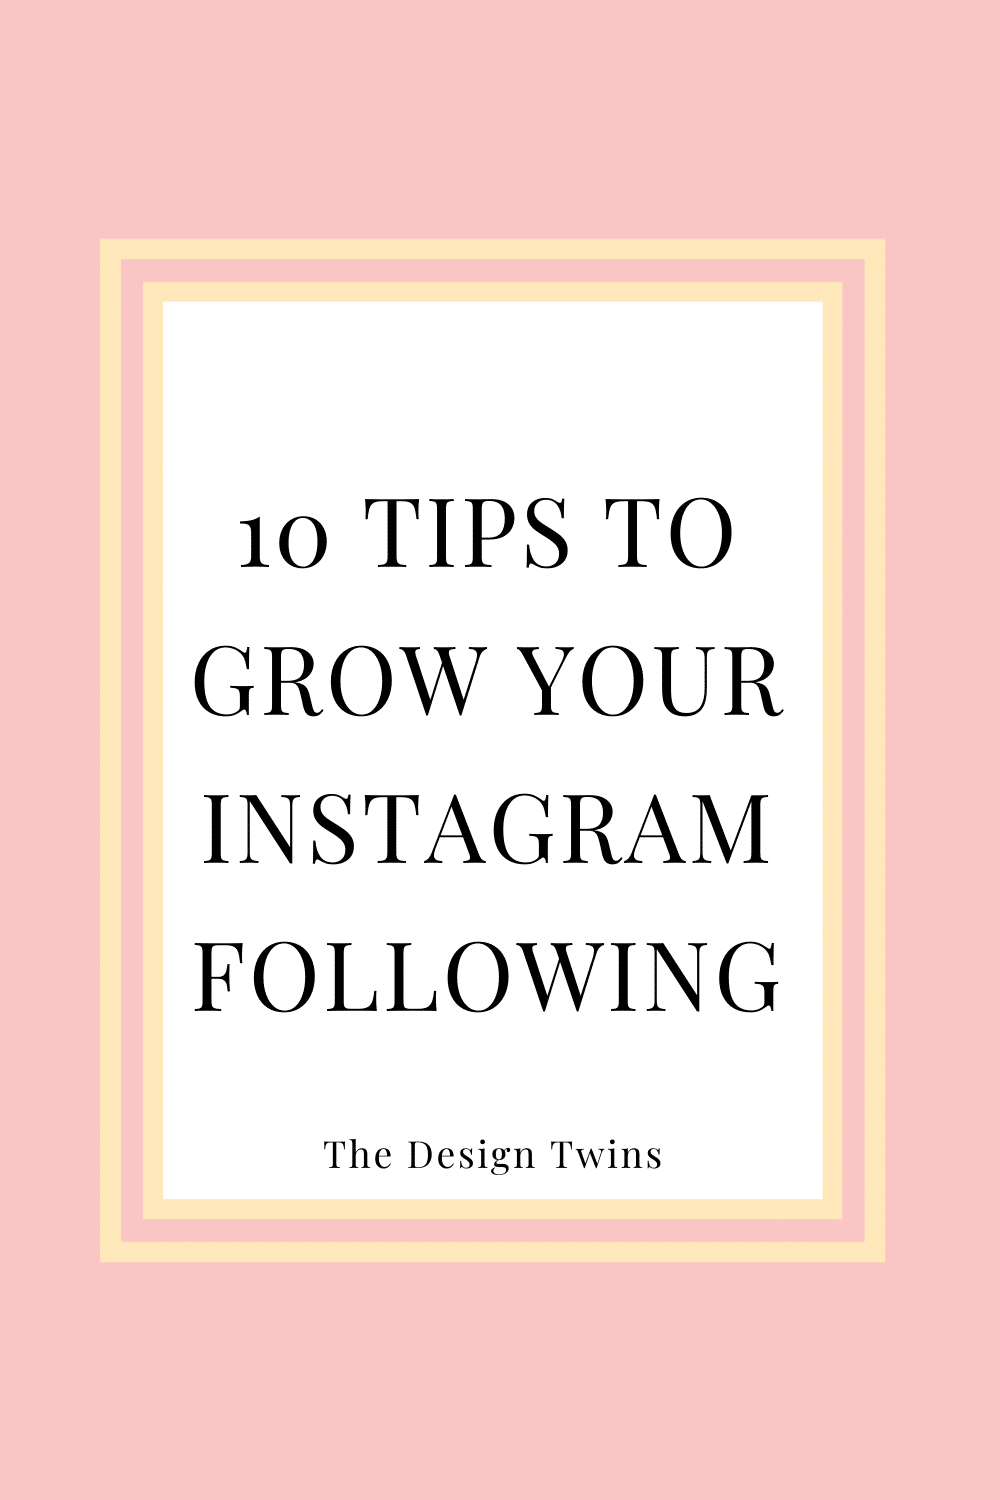 The Design Twins share their top 10 Tips to grow your instagram following